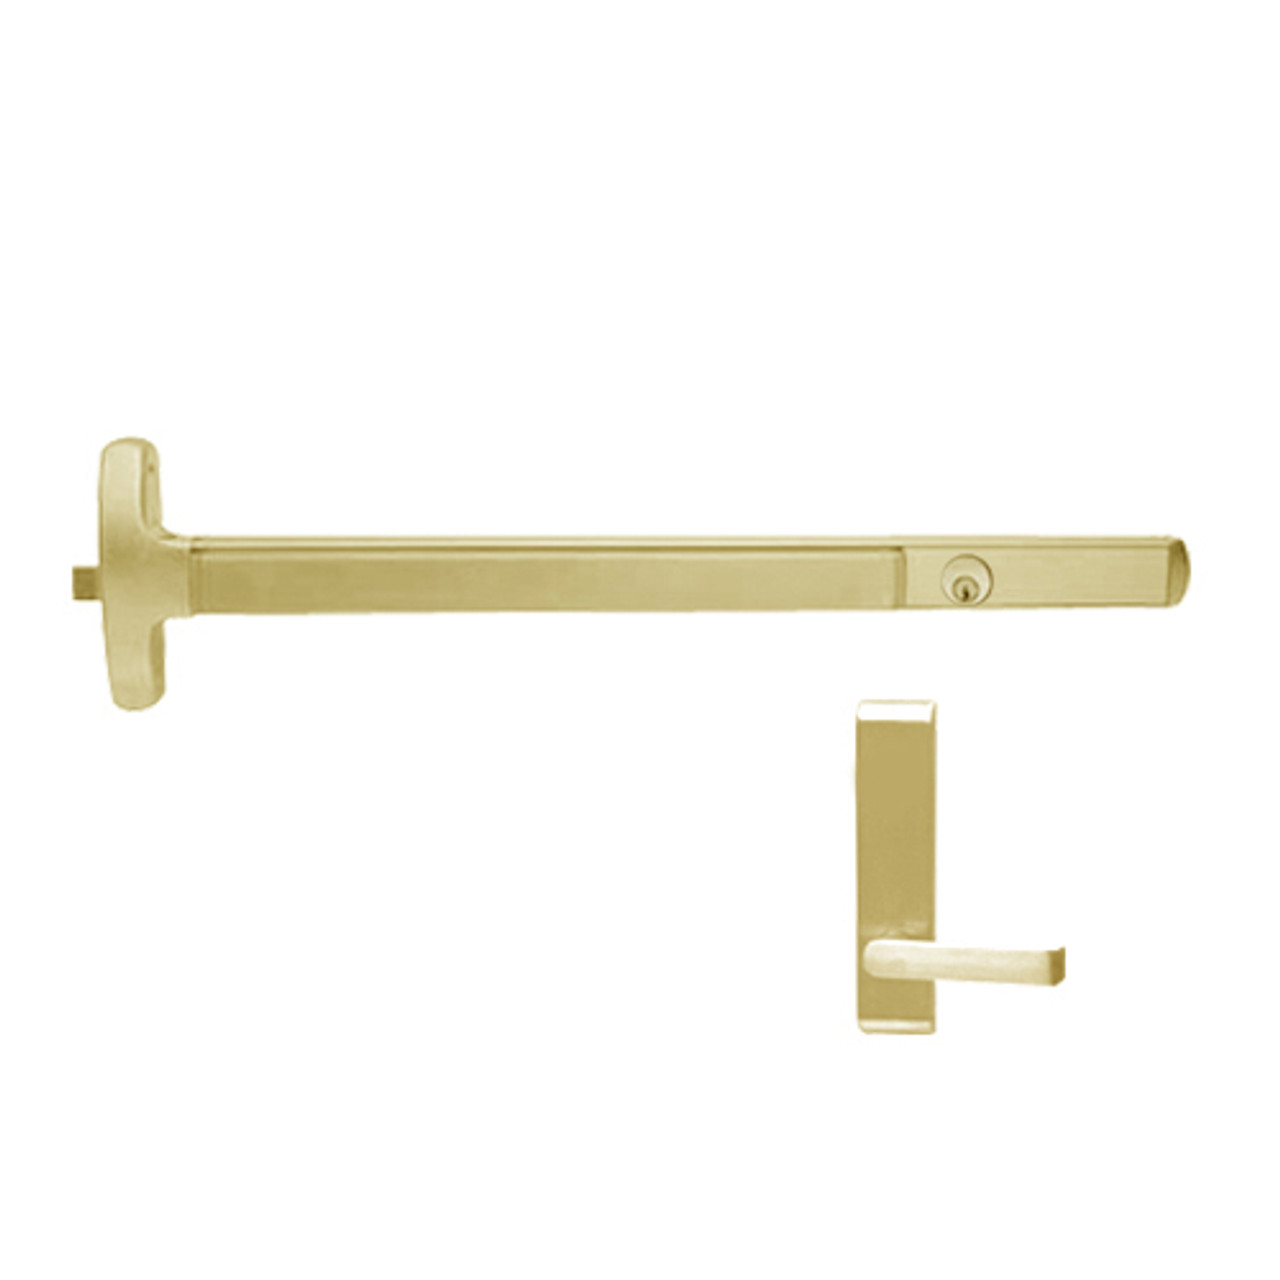 CD24-R-L-DT-DANE-US4-3-LHR Falcon Exit Device in Satin Brass